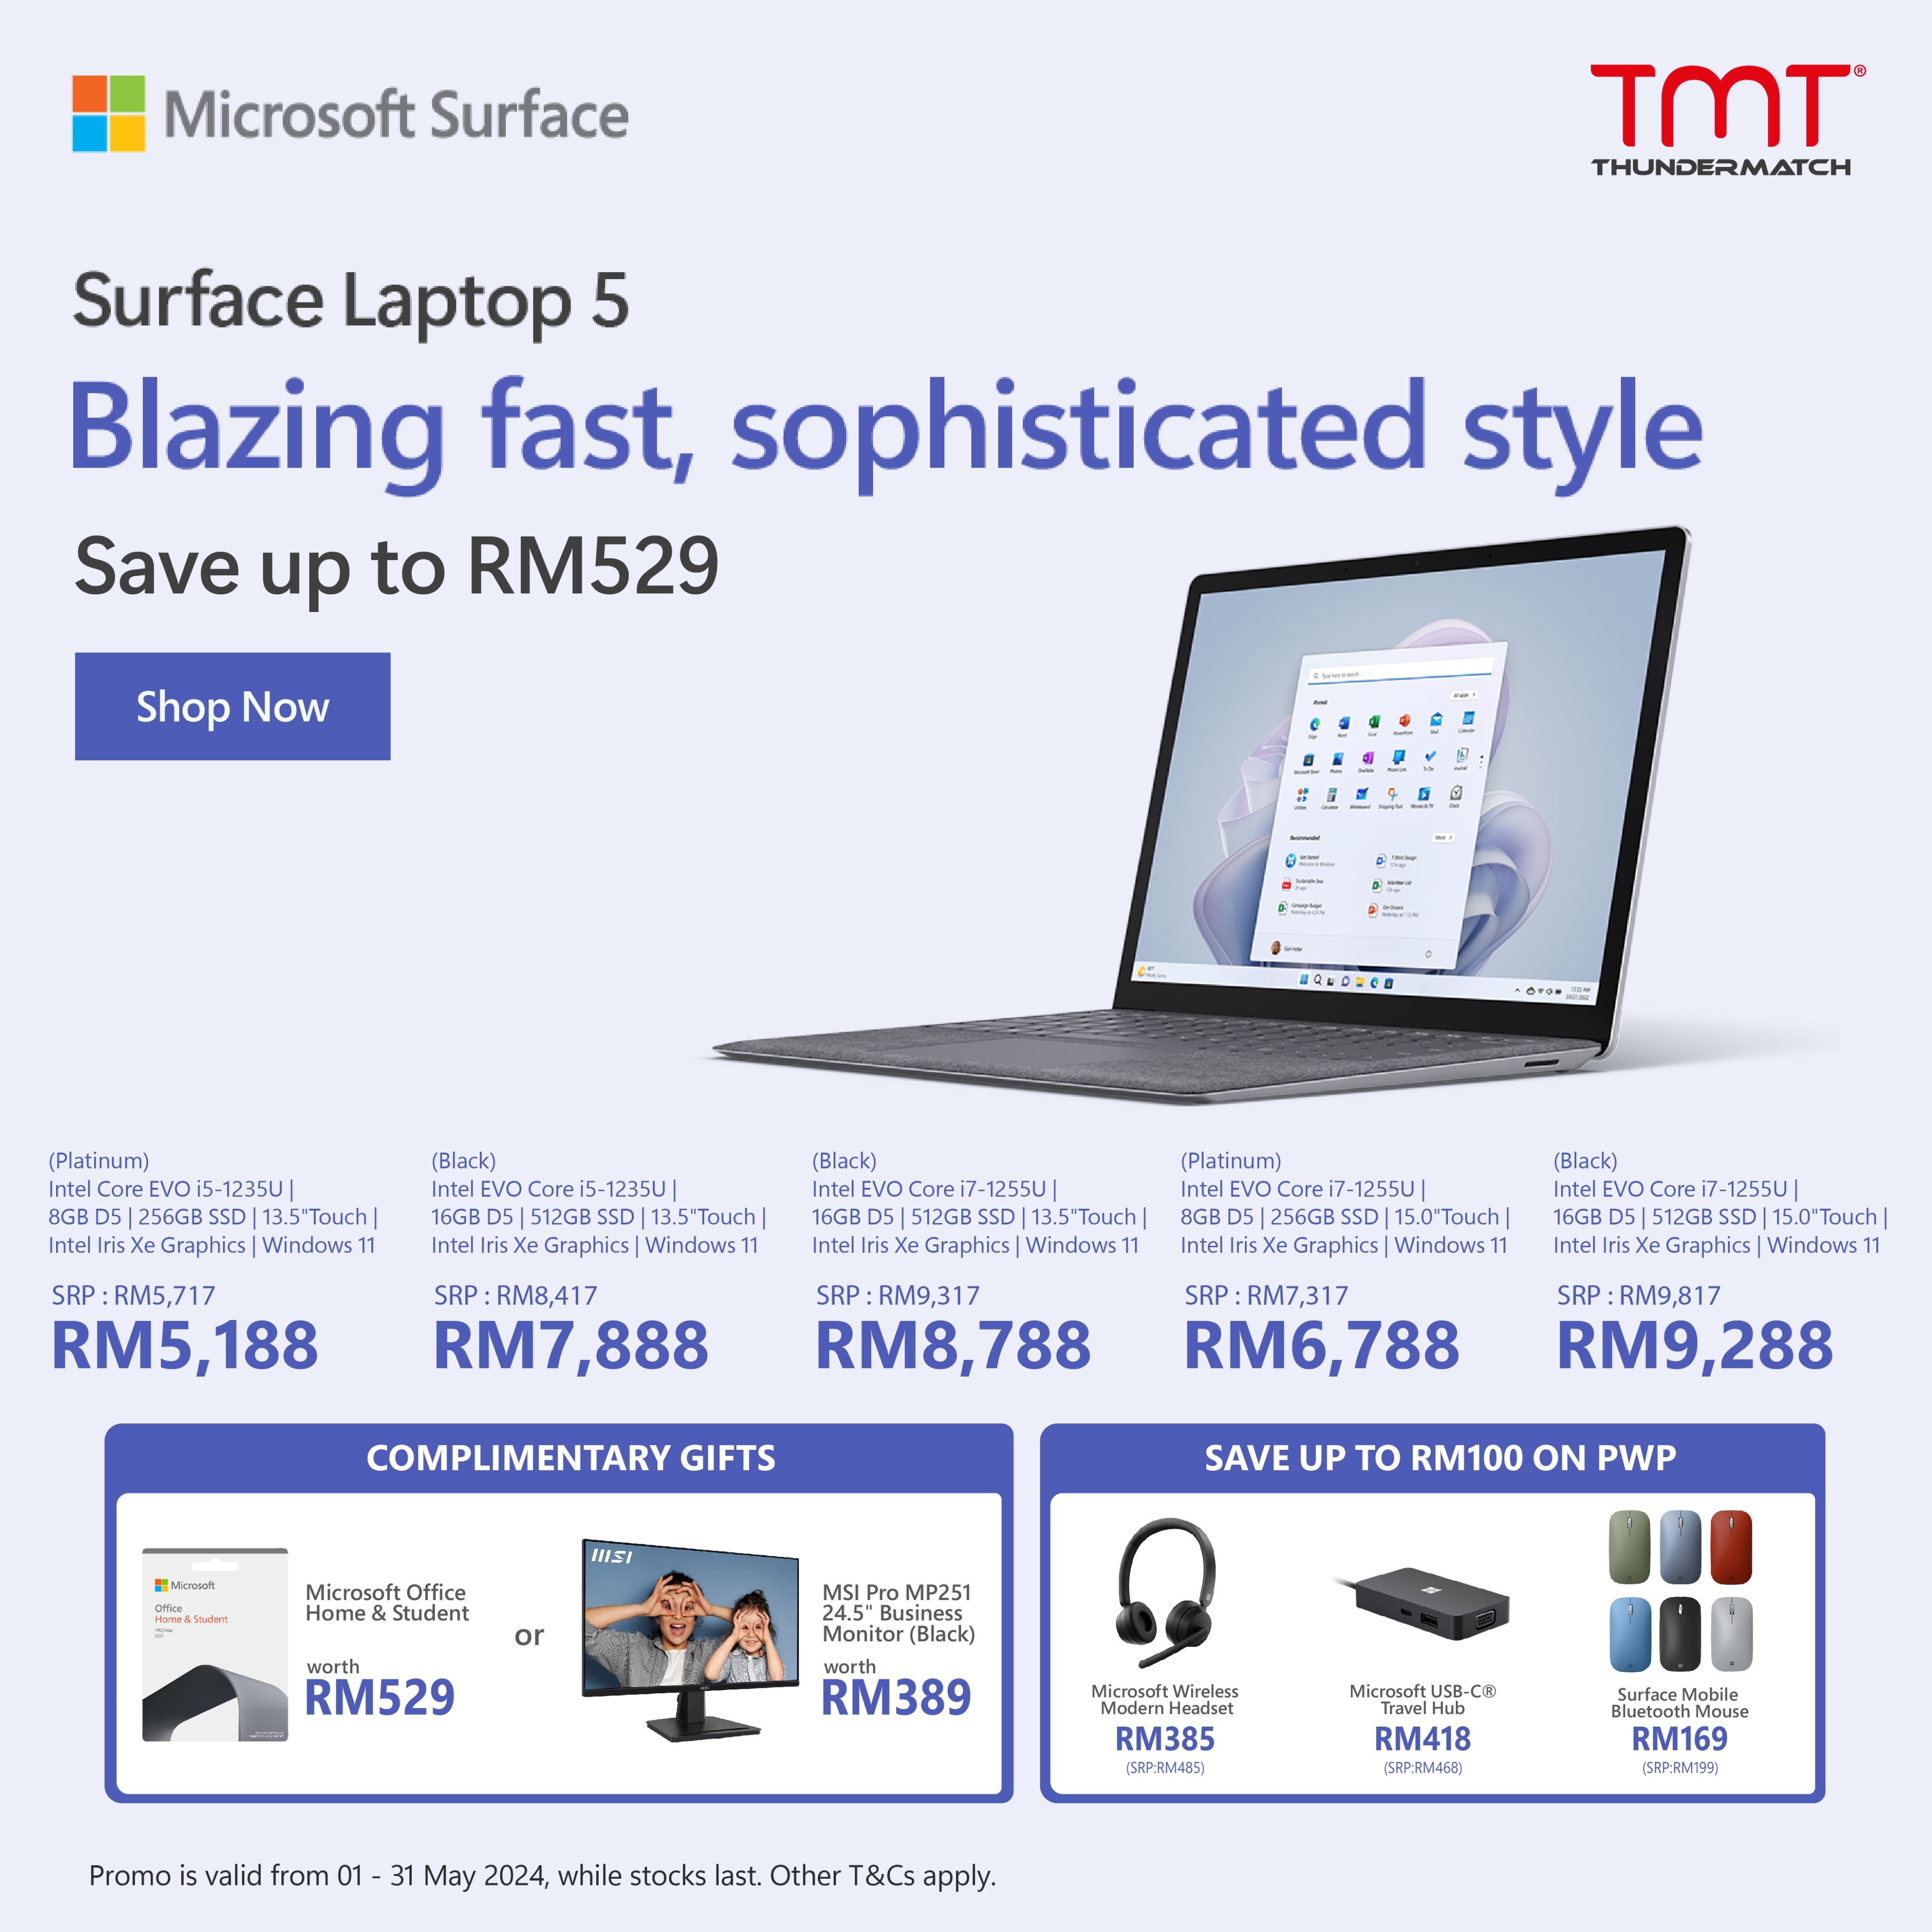 Microsoft Surface Laptop 5 ( Platinum / Black ) 13.5" / 15" Touch + Free Microsoft Office Home & Student 2021 Worth RM529